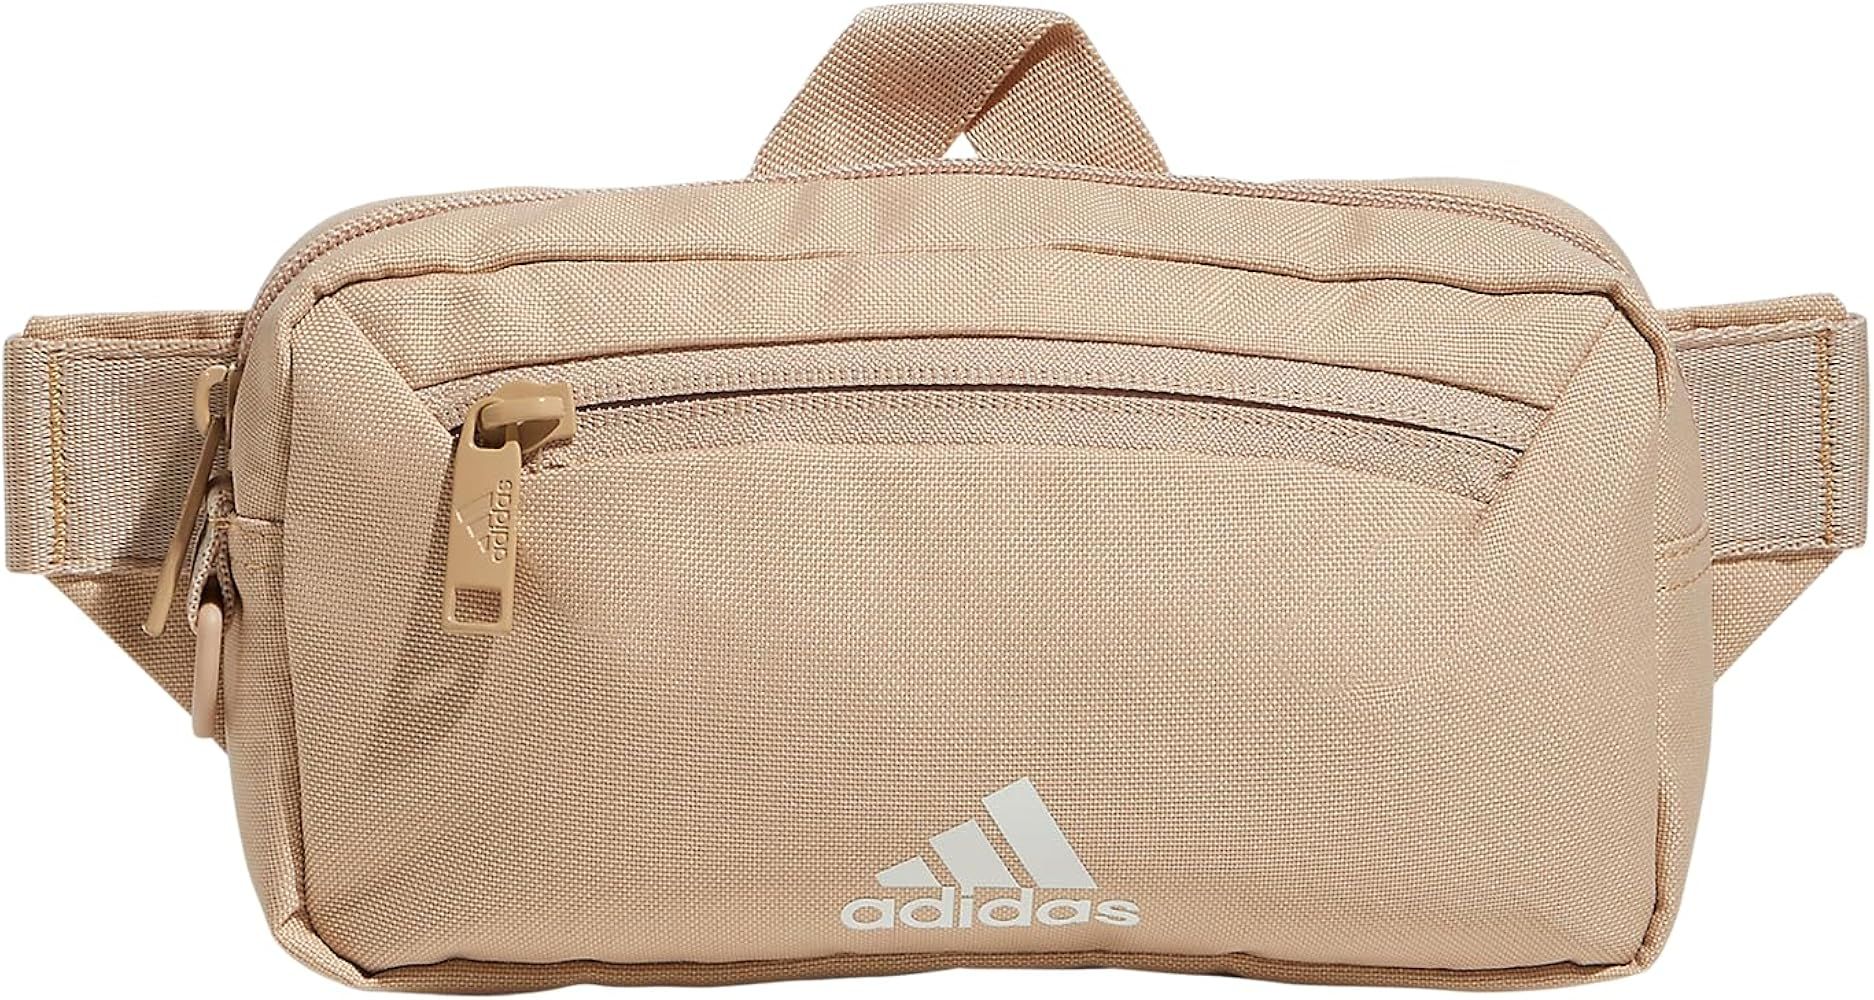 adidas Must Have 2.0 Waist Pack Bag for Festivals and Travel | Amazon (US)